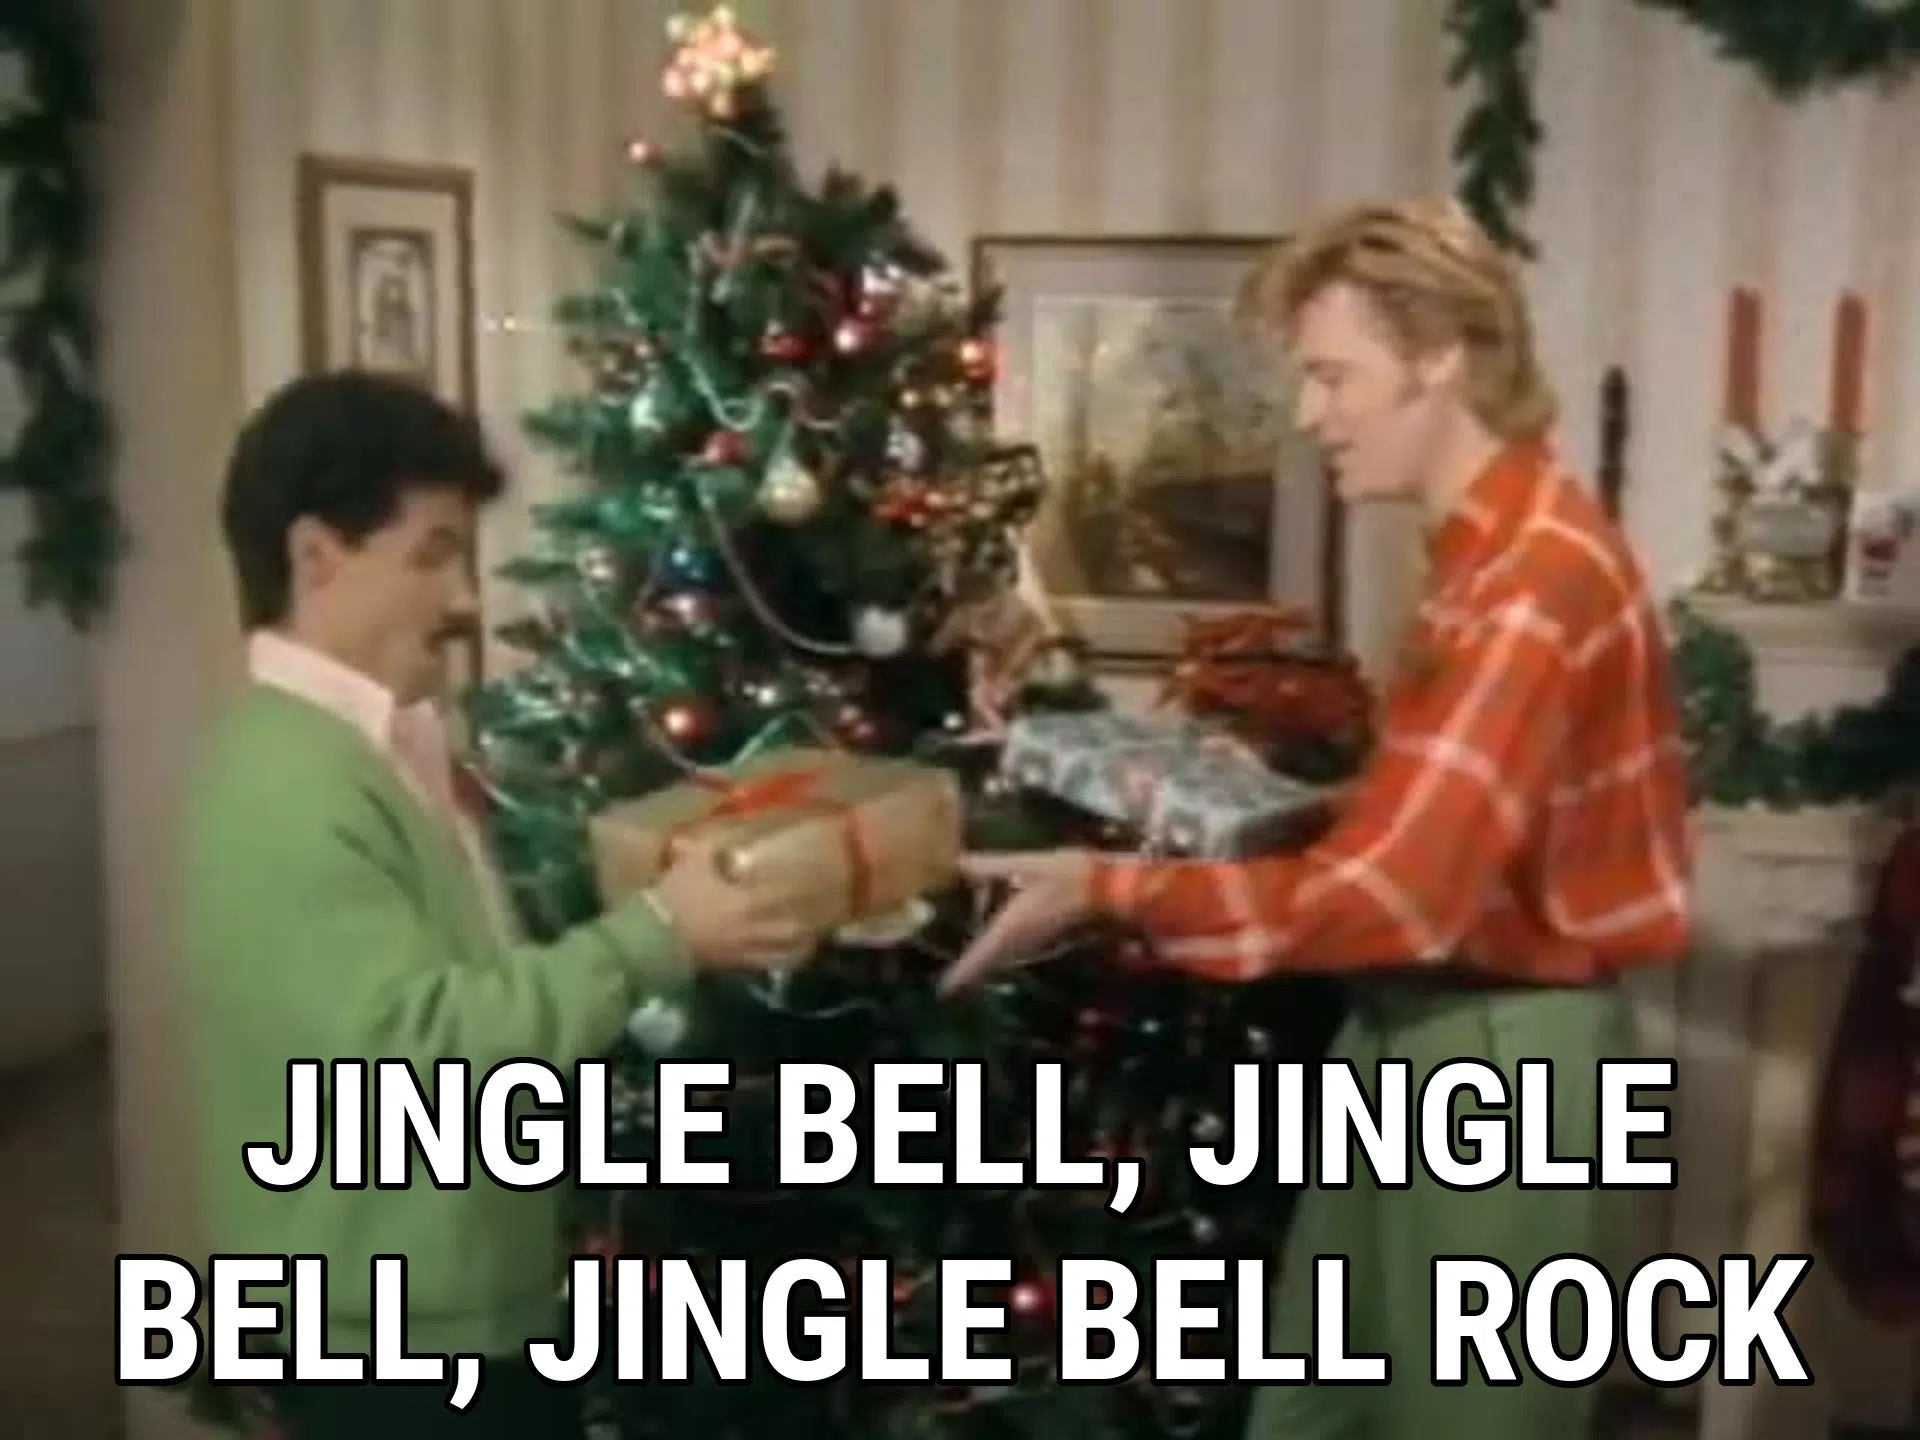 Fun Friday Christmas Video: Hall and Oates--Jingle Bell Rock